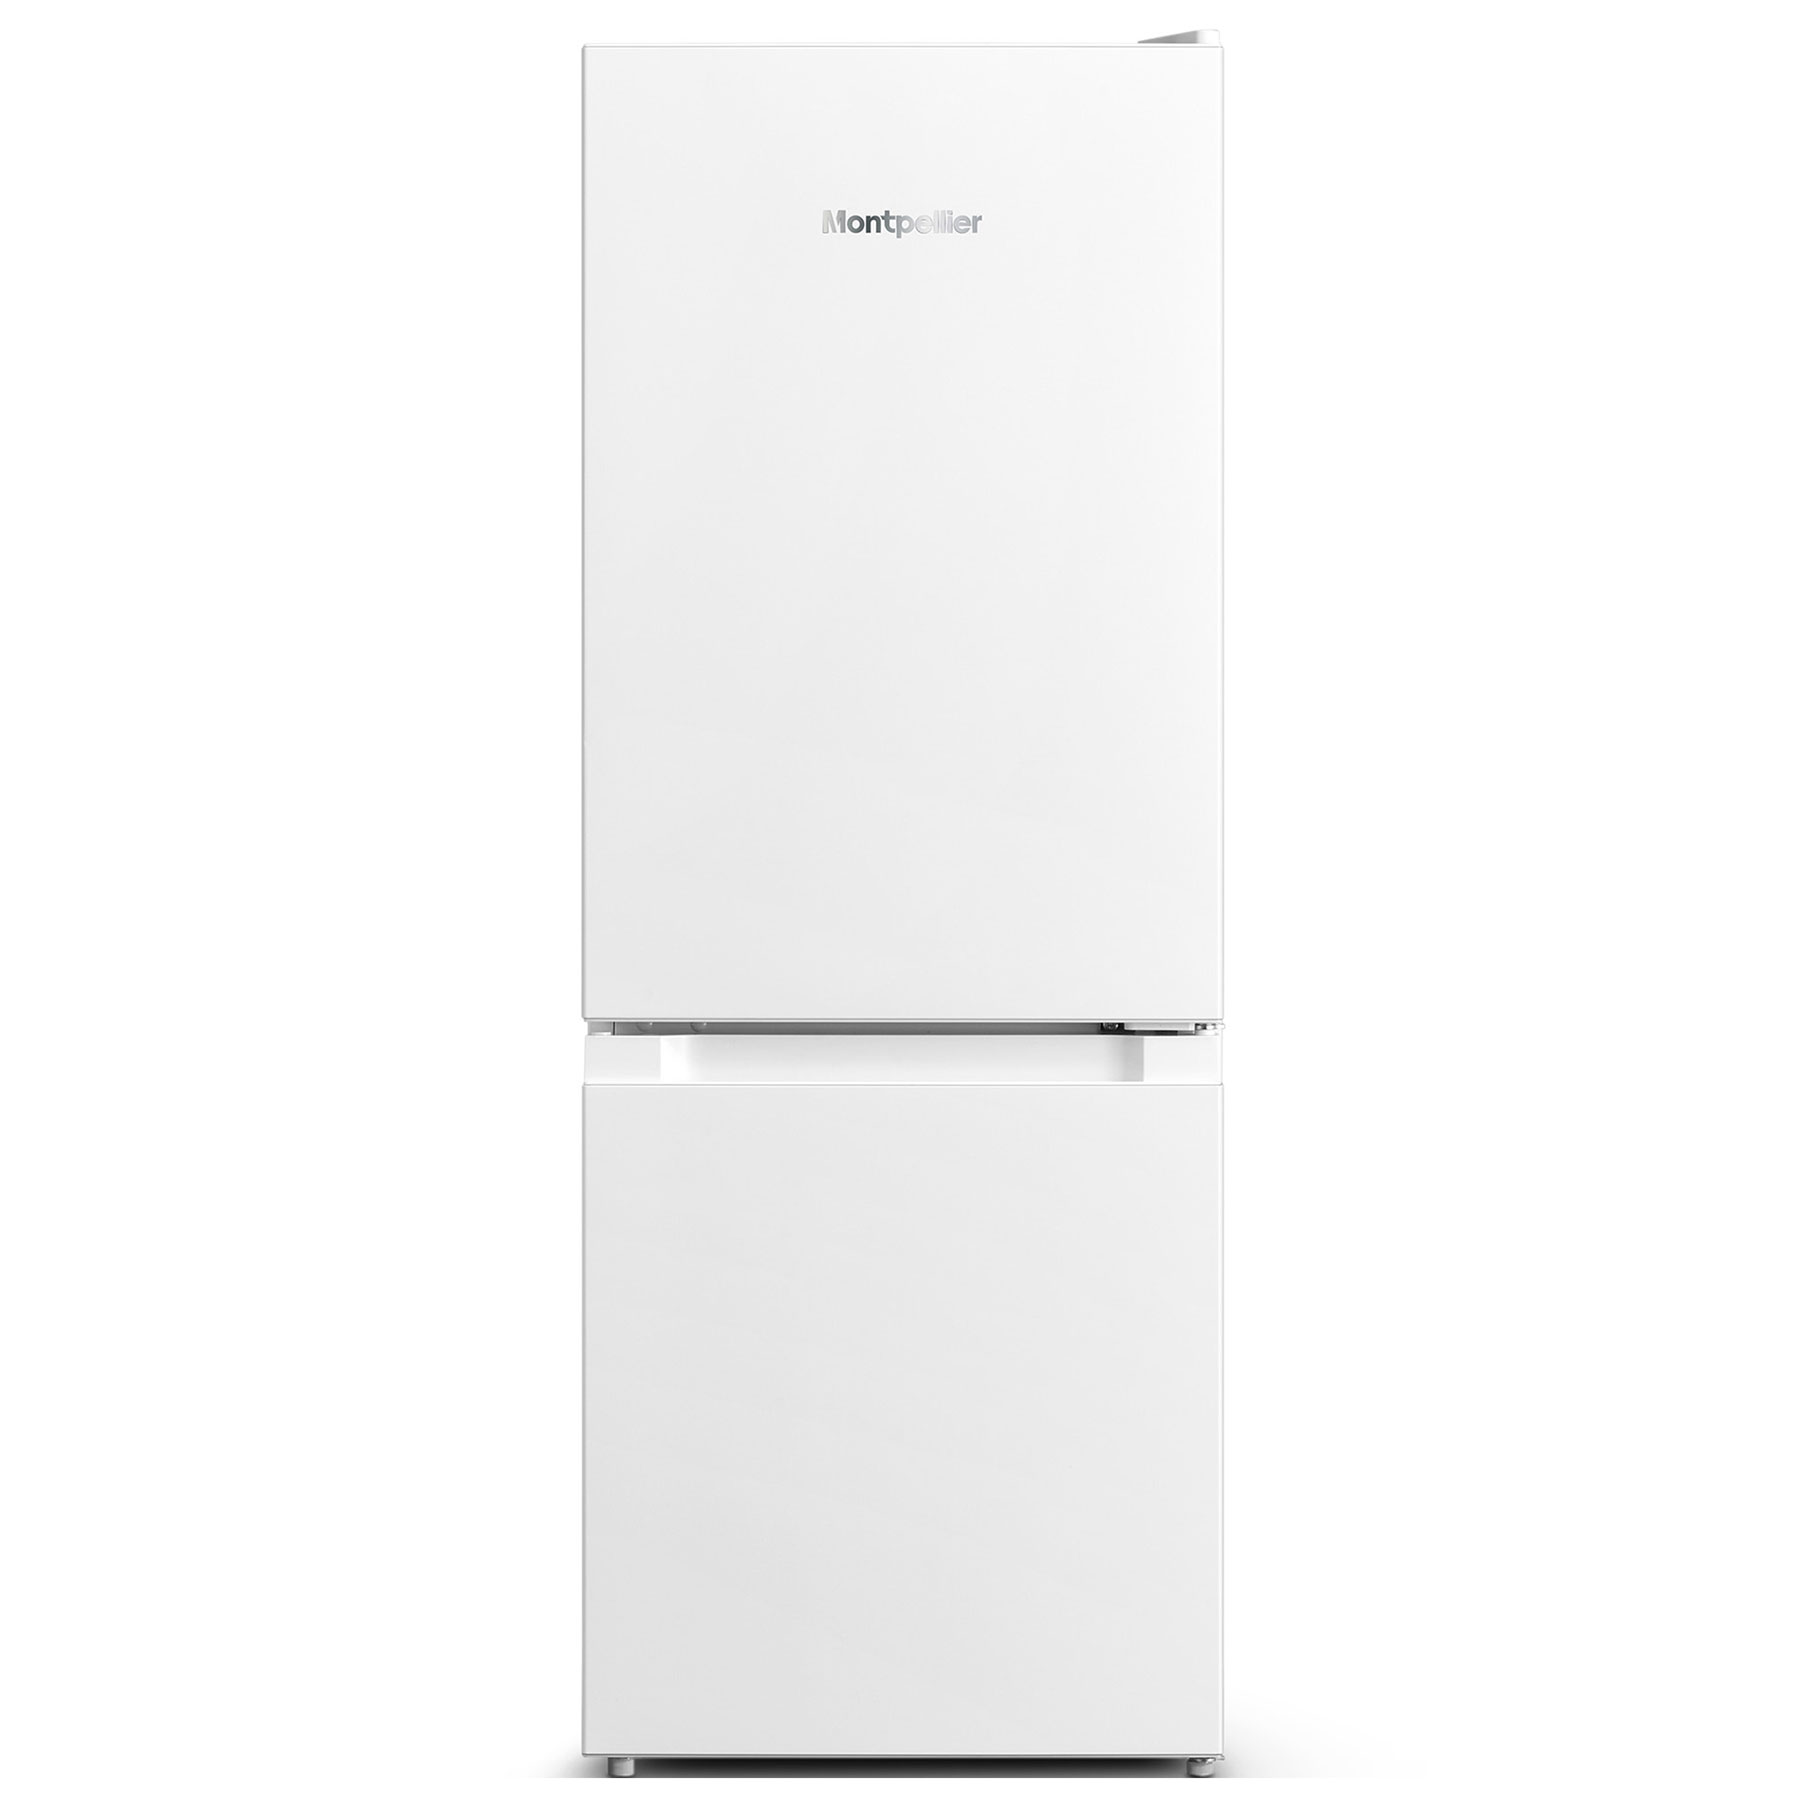 Image of Montpellier MS125W 47cm Fridge Freezer in White 1 24m F Rated 91 42L